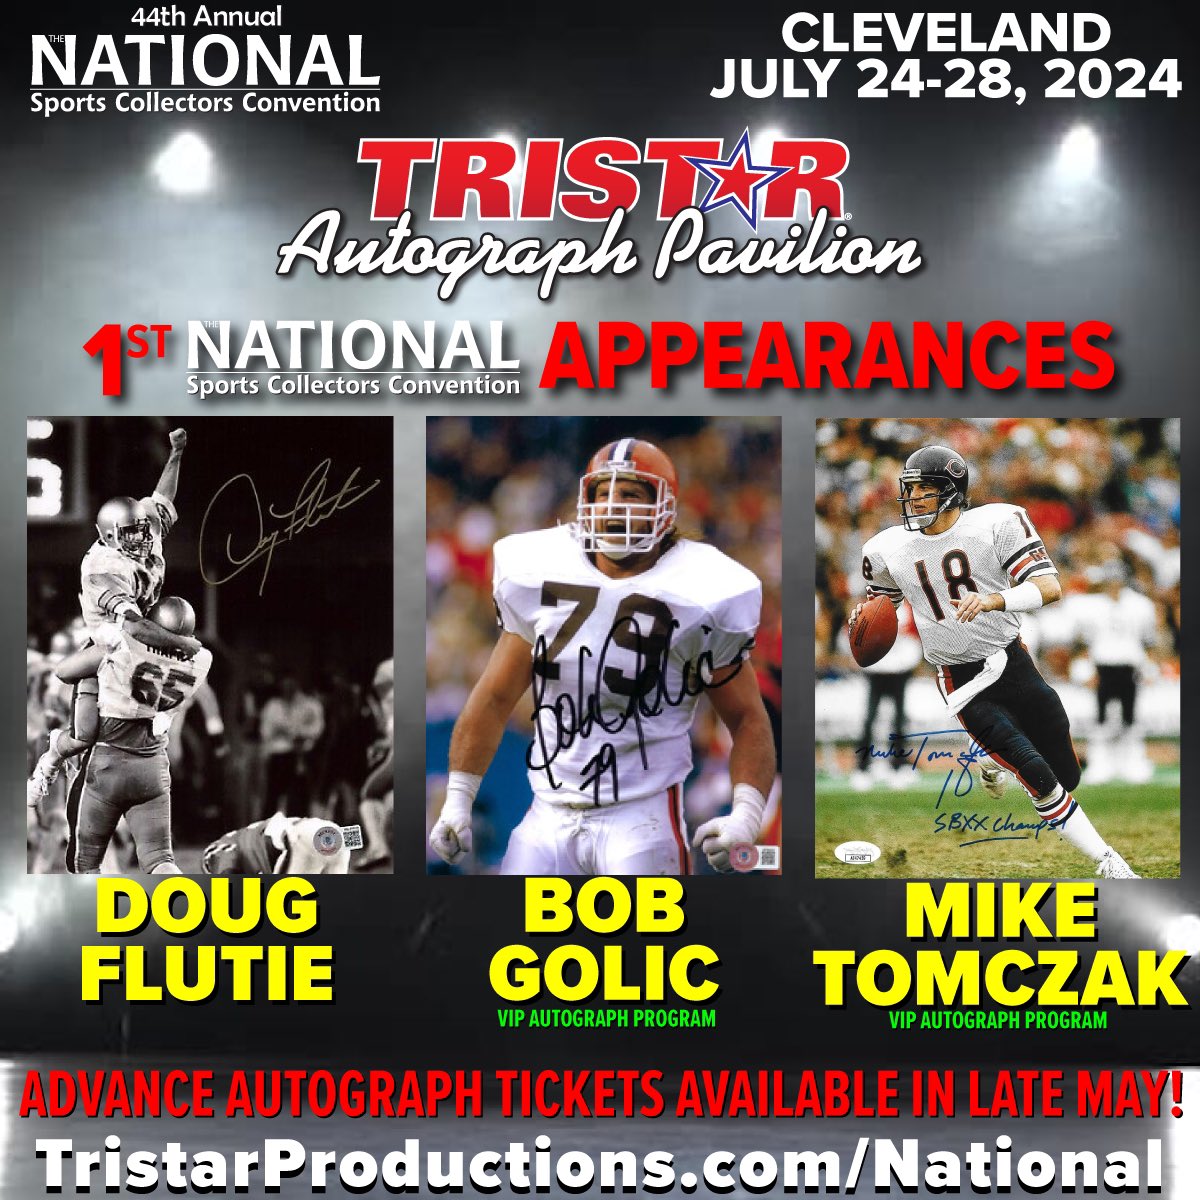 DOUG FLUTIE, BOB GOLIC & MIKE TOMCZAK are the newest additions to the TRISTAR Autograph Pavilion at the @NSCCShow! All 3 will make 1st-ever NSCC appearances! Golic & Tomczak = VIP Autograph Program #NSCC24 advance autograph tickets available late May! tristarproductions.com/National/